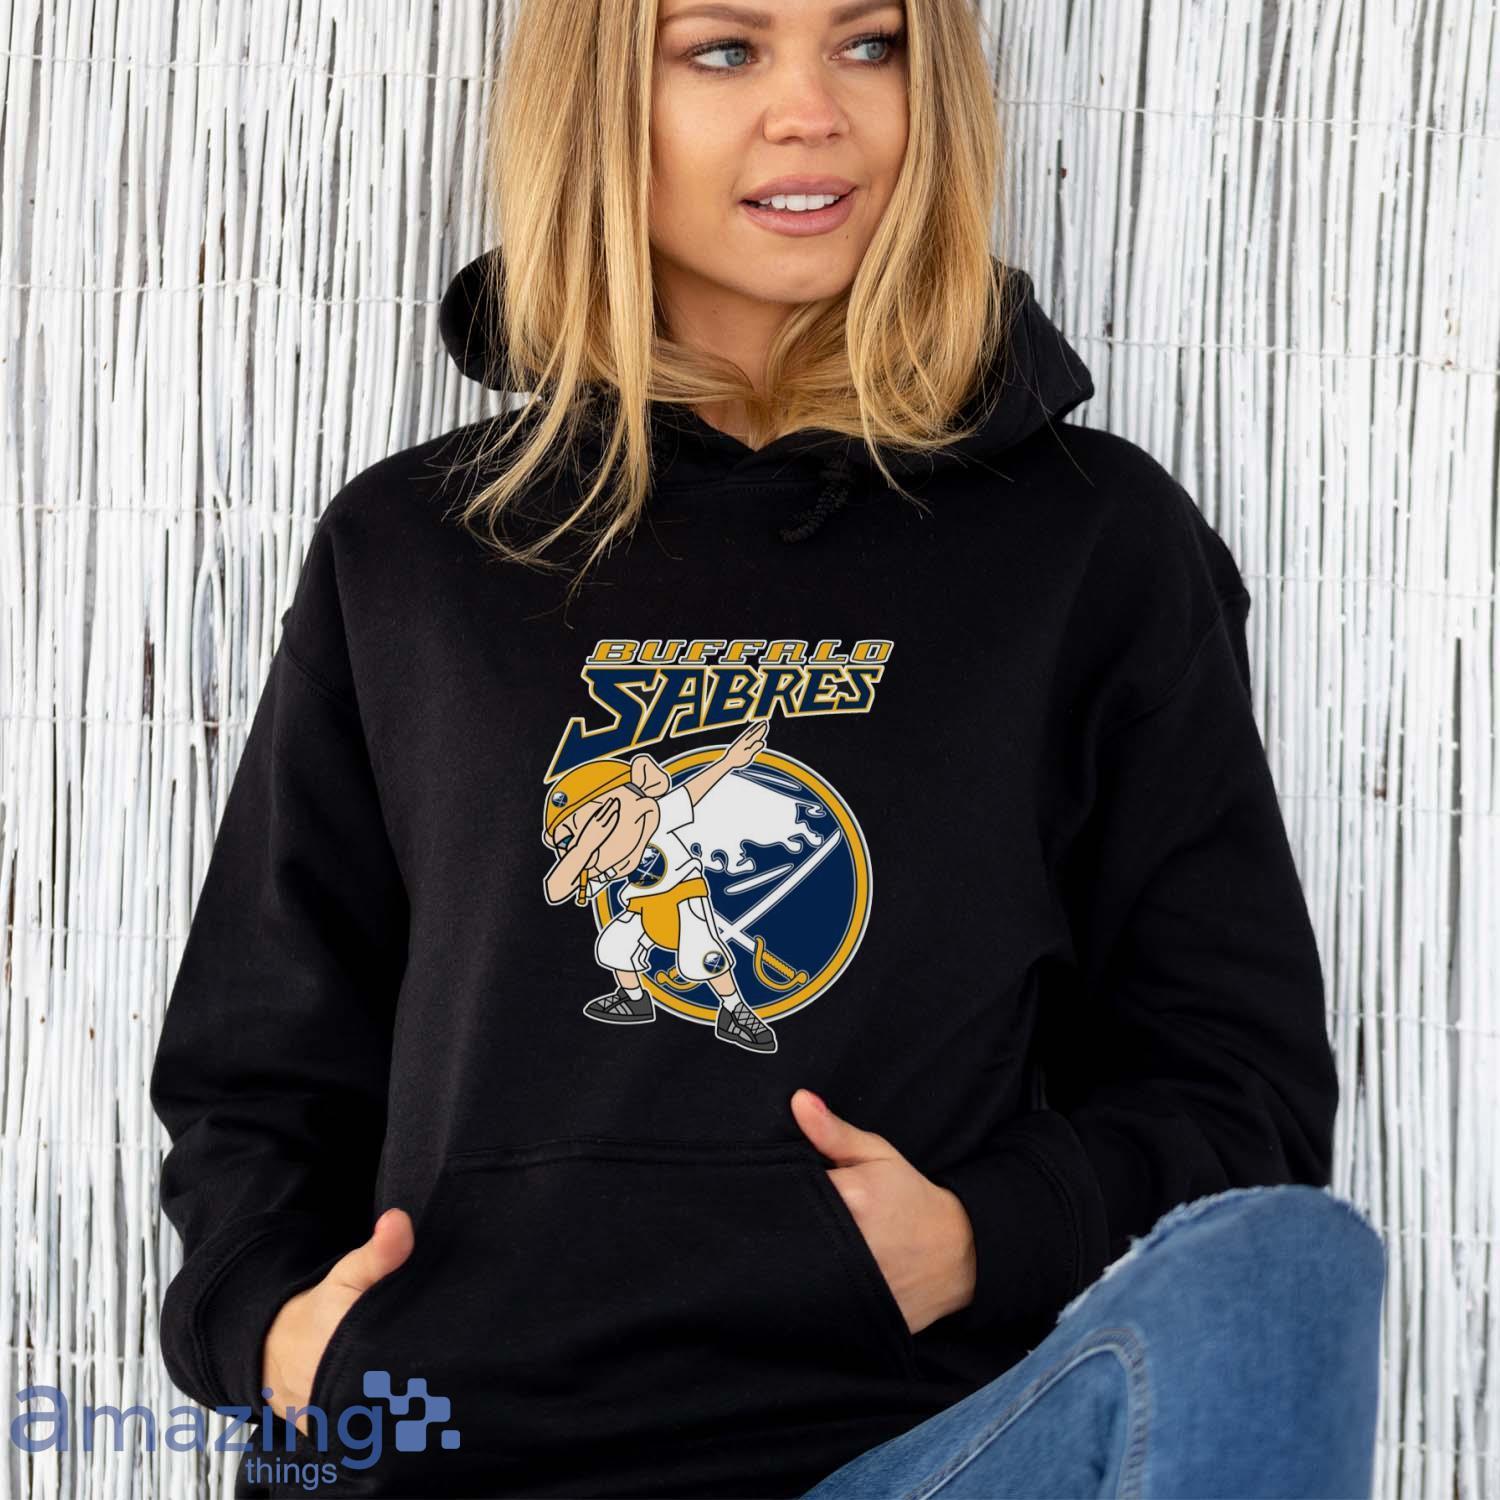 Buffalo Sabres Hockey Jersey For Babies, Youth, Women, or Men